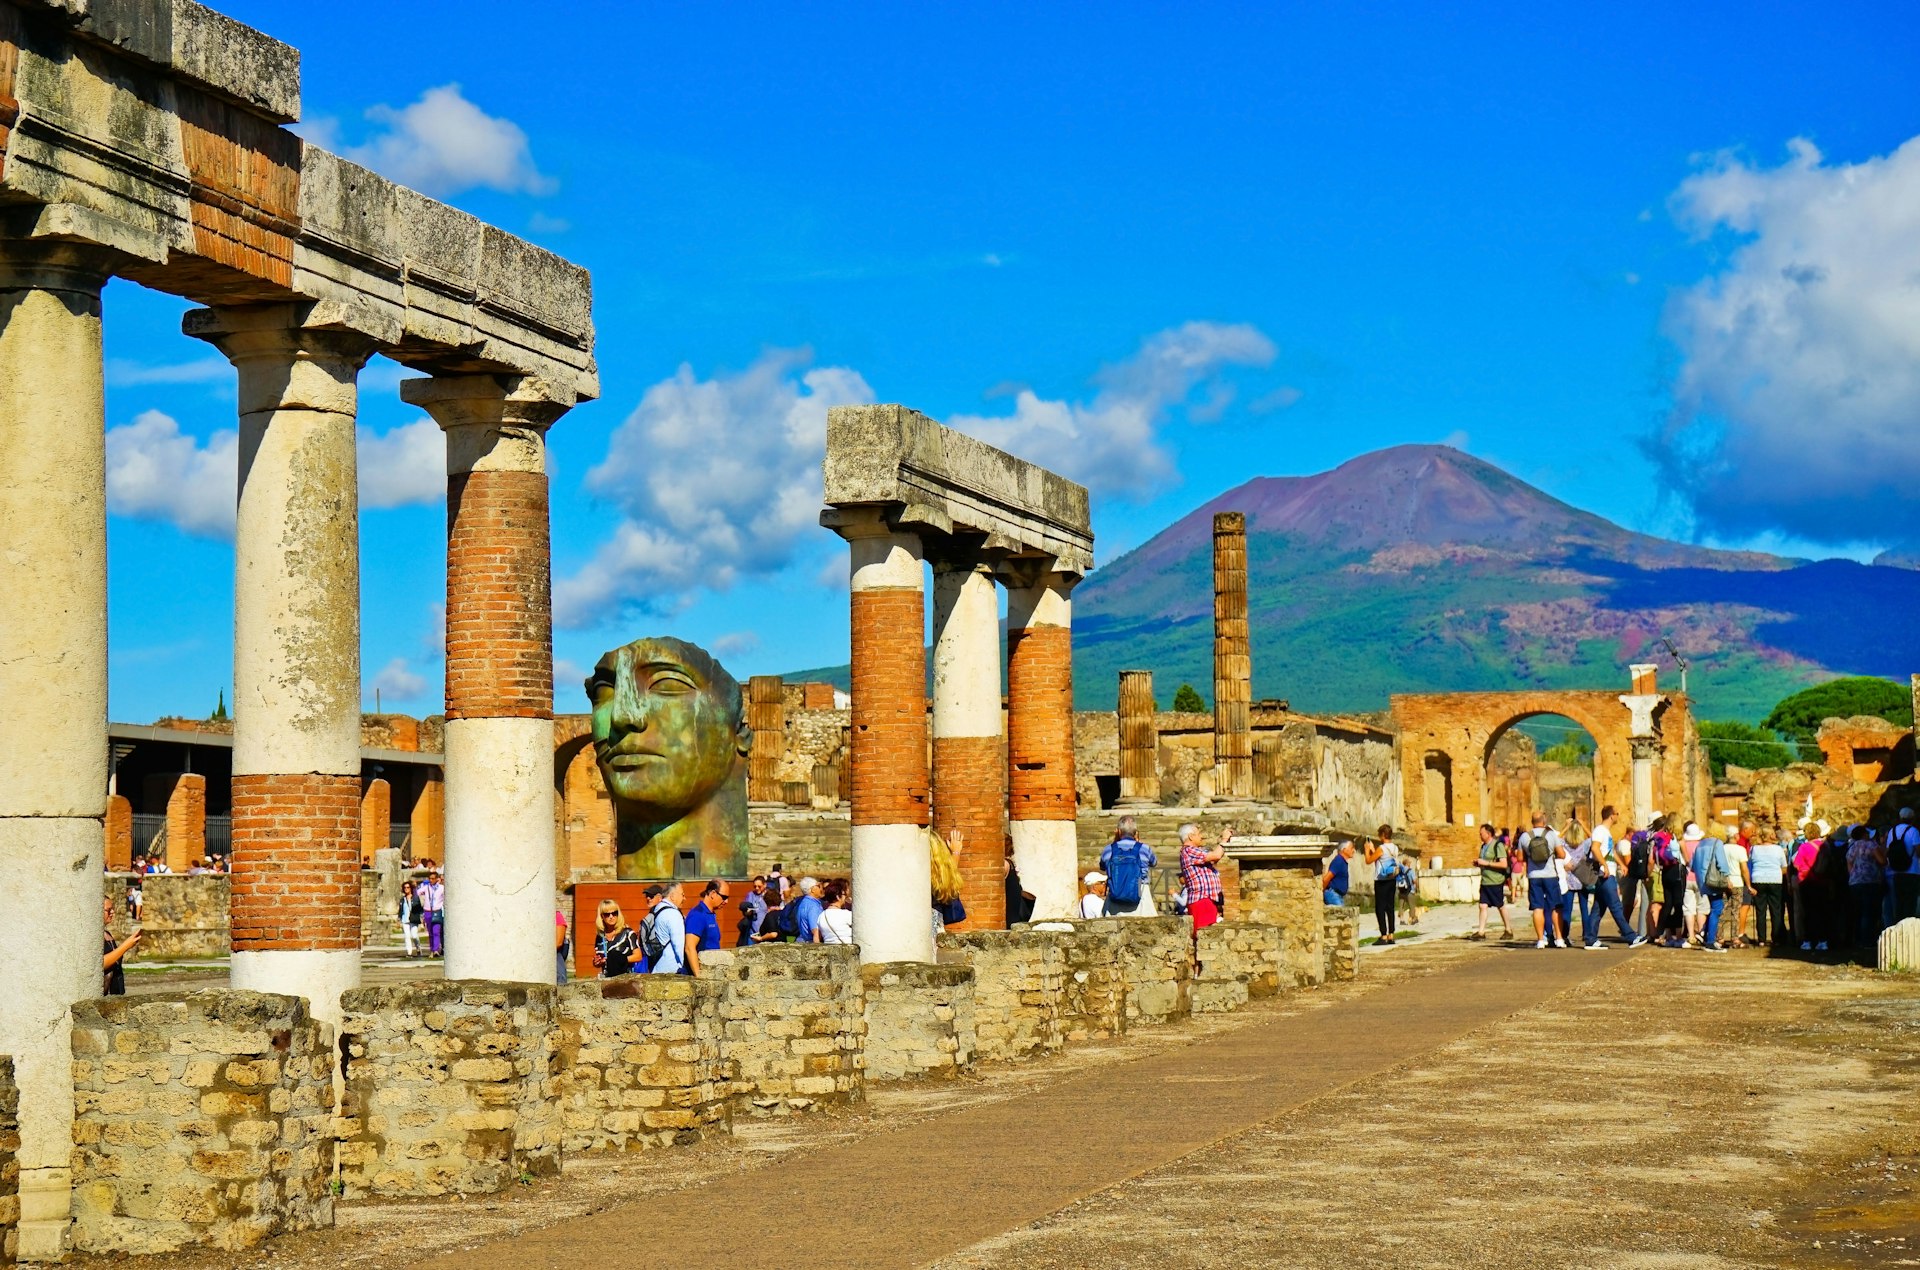 Tourists stand among tall stone columns with a mountain rising in the distance above the town